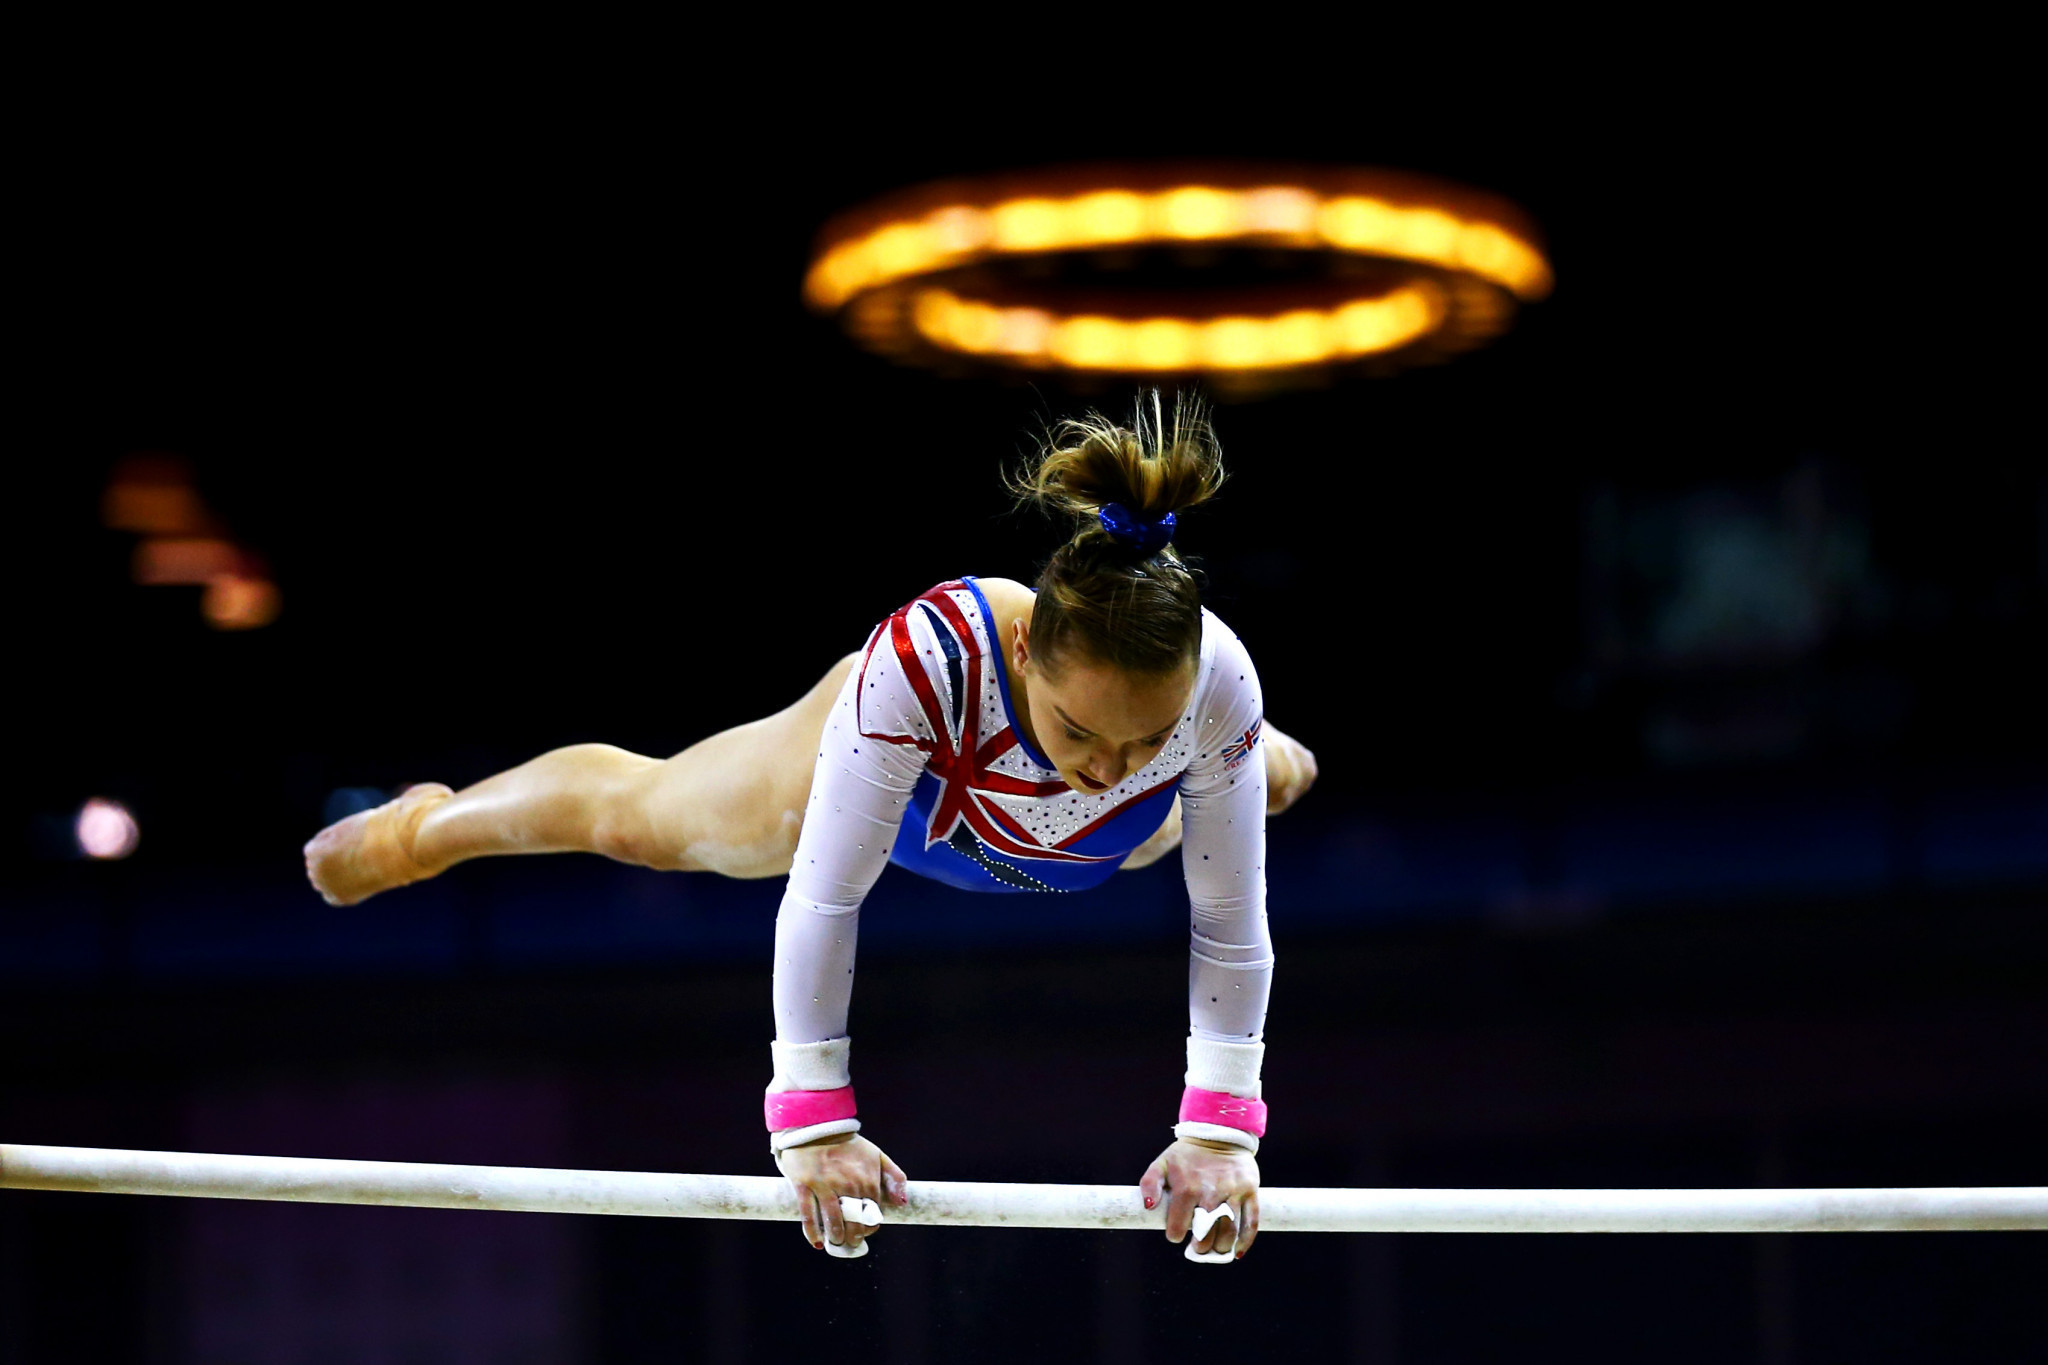 Amy Tinkler, winner of an Olympic floor bronze medal at Rio 2016, is among those who have spoken out over alleged mistreatment by British Gymnastics ©Getty Images